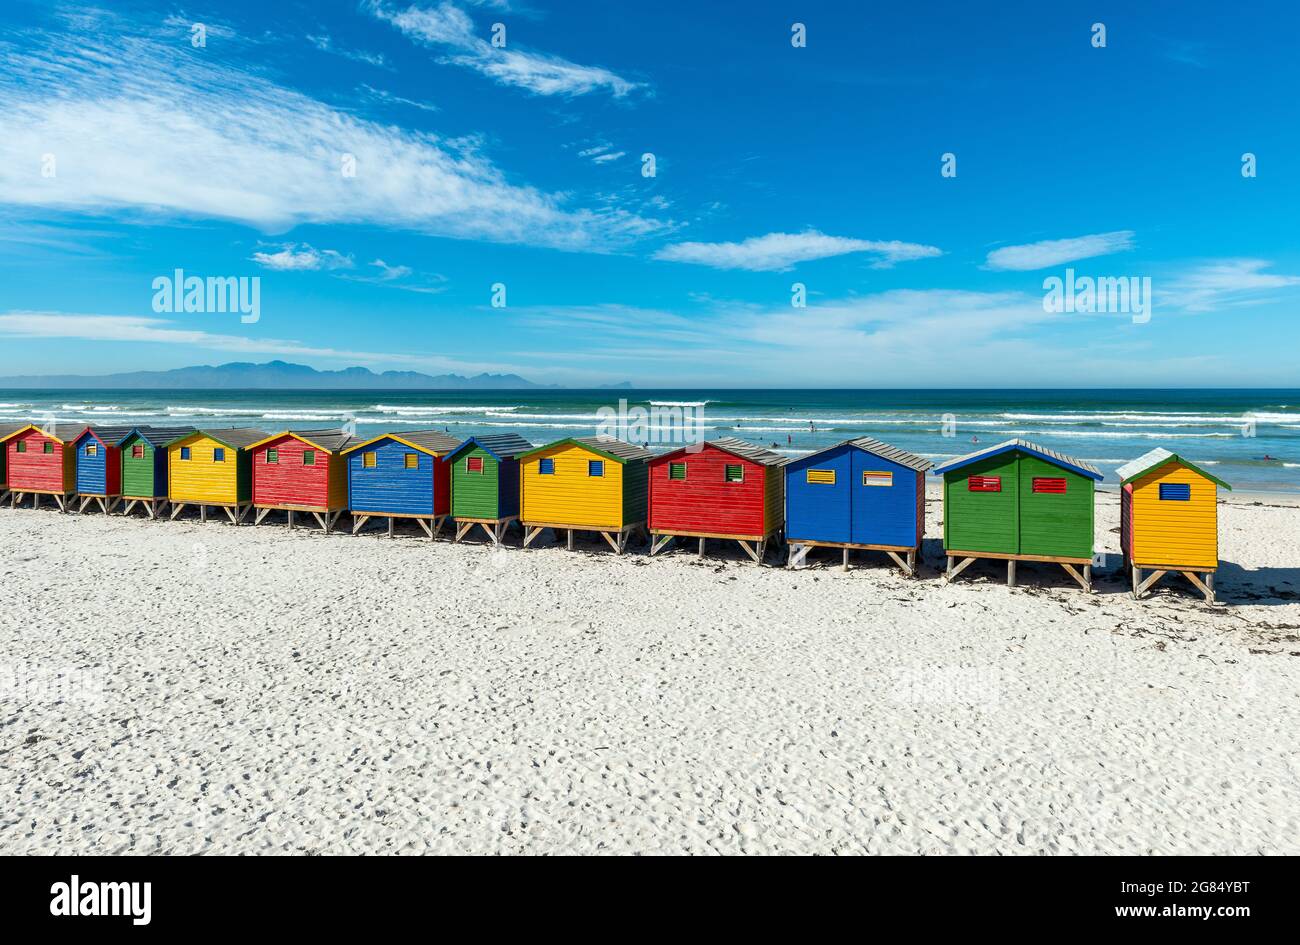 Muizenberg beach with colorful wooden beach cabins huts, Cape Town, South Africa. Stock Photo